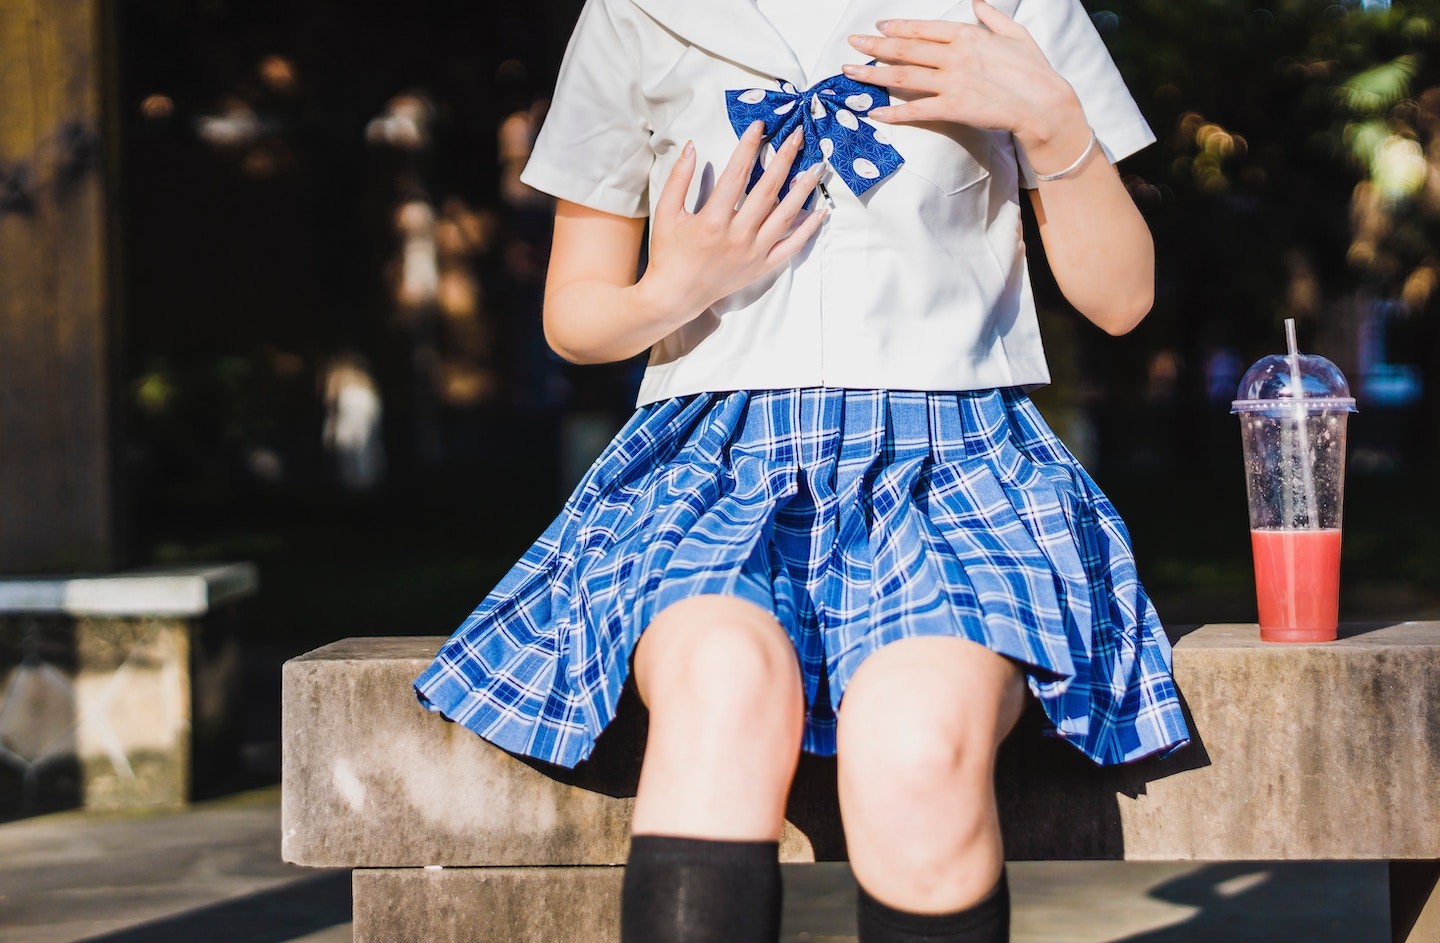 School Uniform Sex - In Japan, Students Have Underwear Rules. Their Parents Say 'No More.'